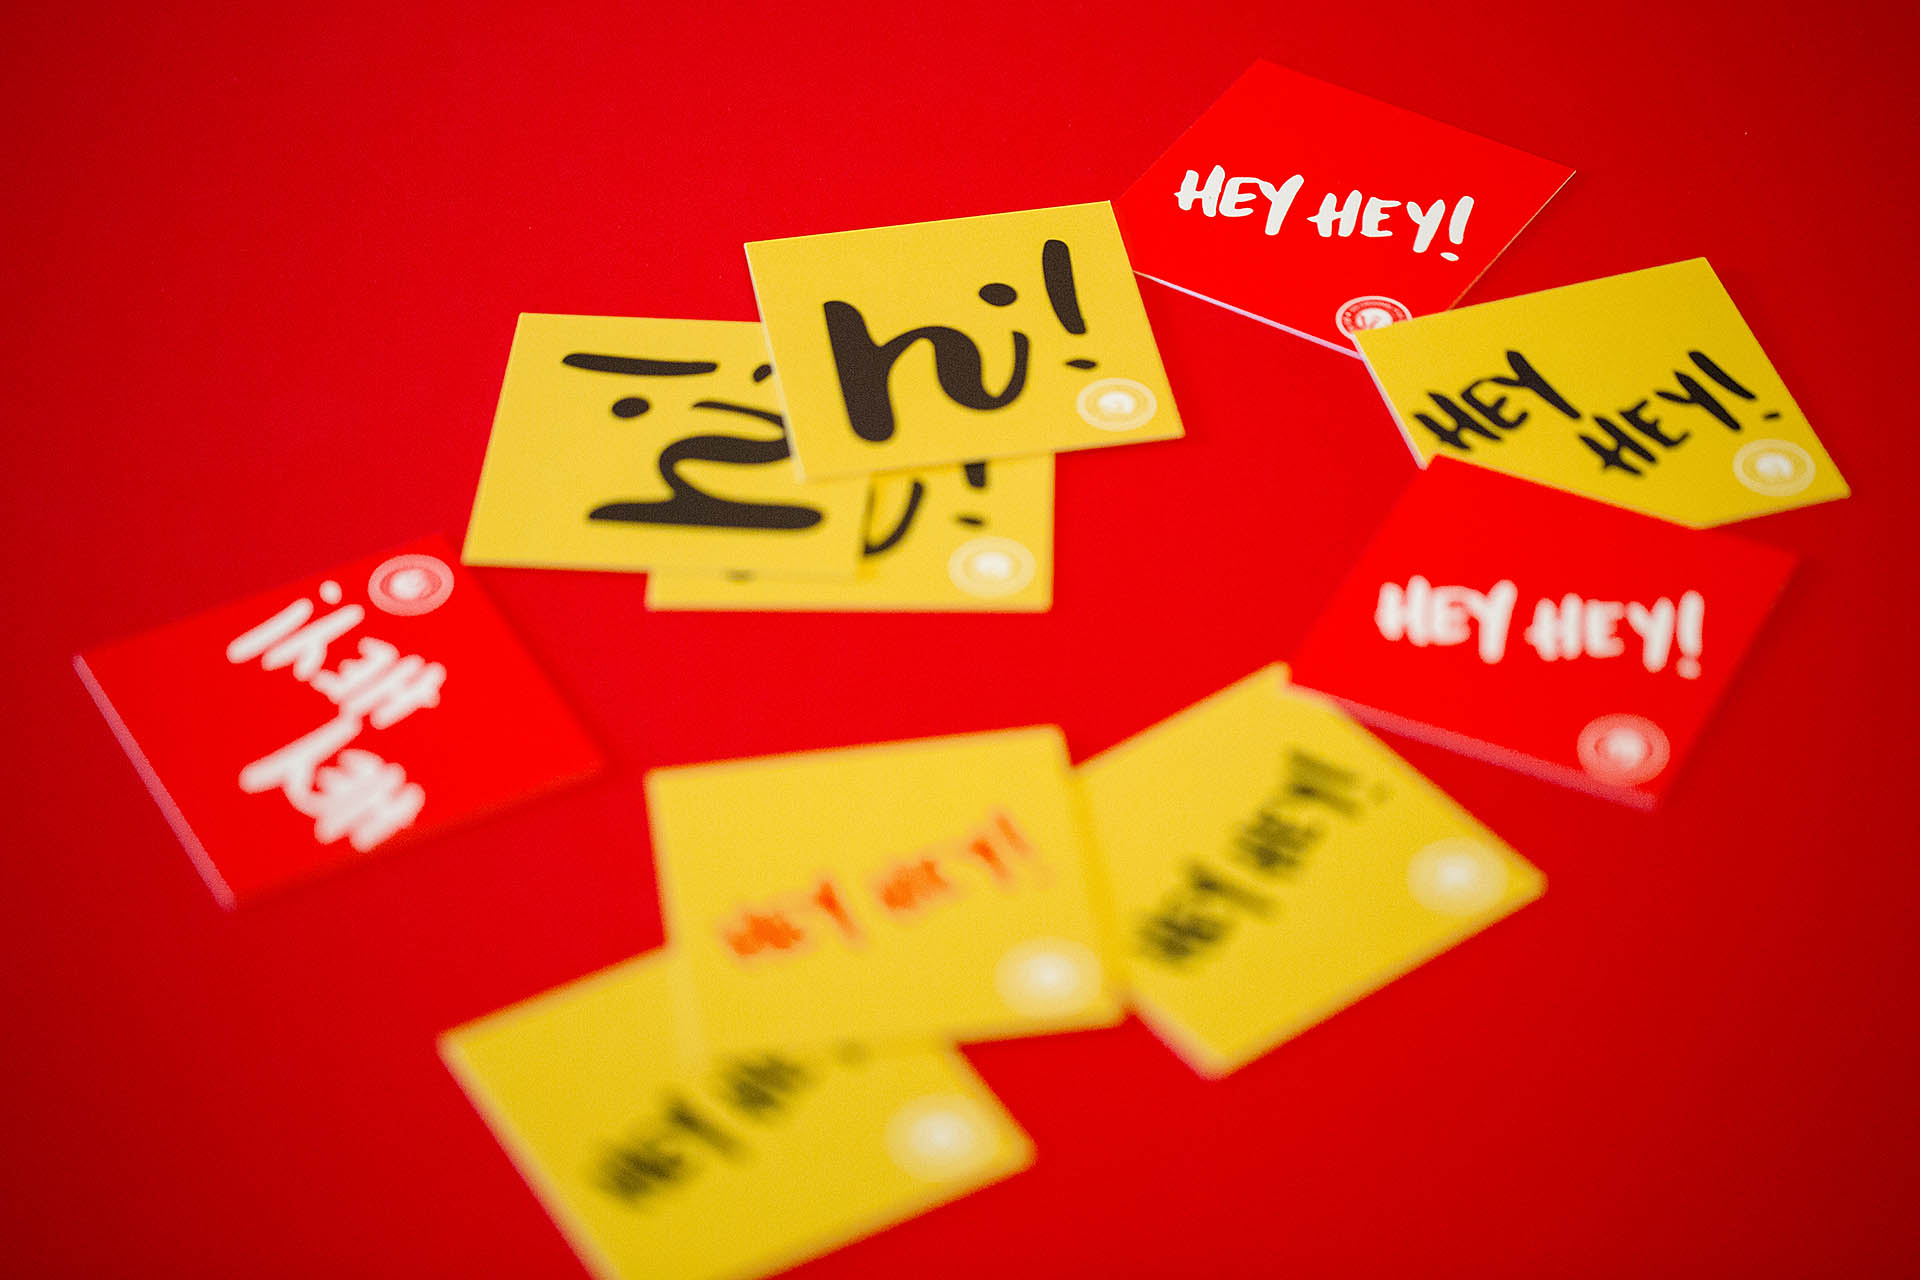 Red and yellow square cards scattered on a red background